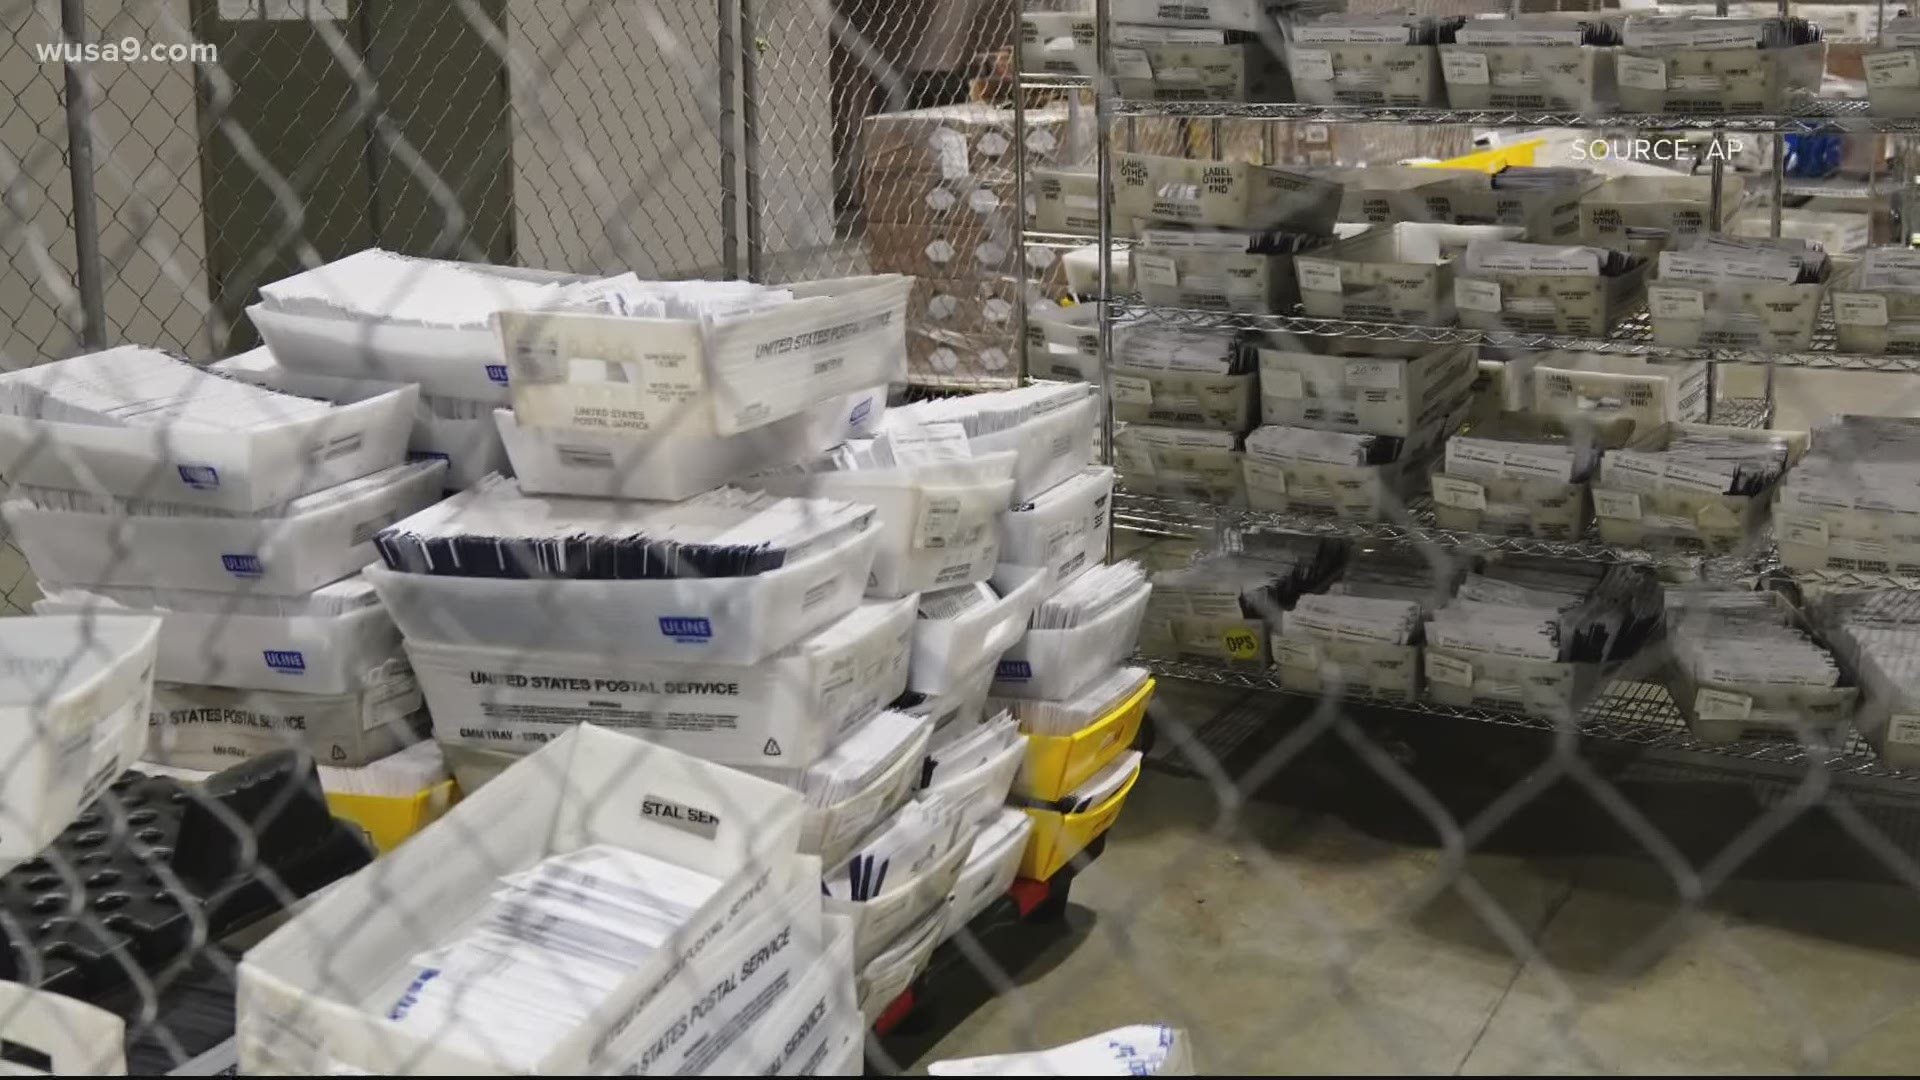 On Thursday, Judge Emmet Sullivan ordered the USPS to conduct twice-daily sweeps at a number of processing centers to find possible missing ballots.